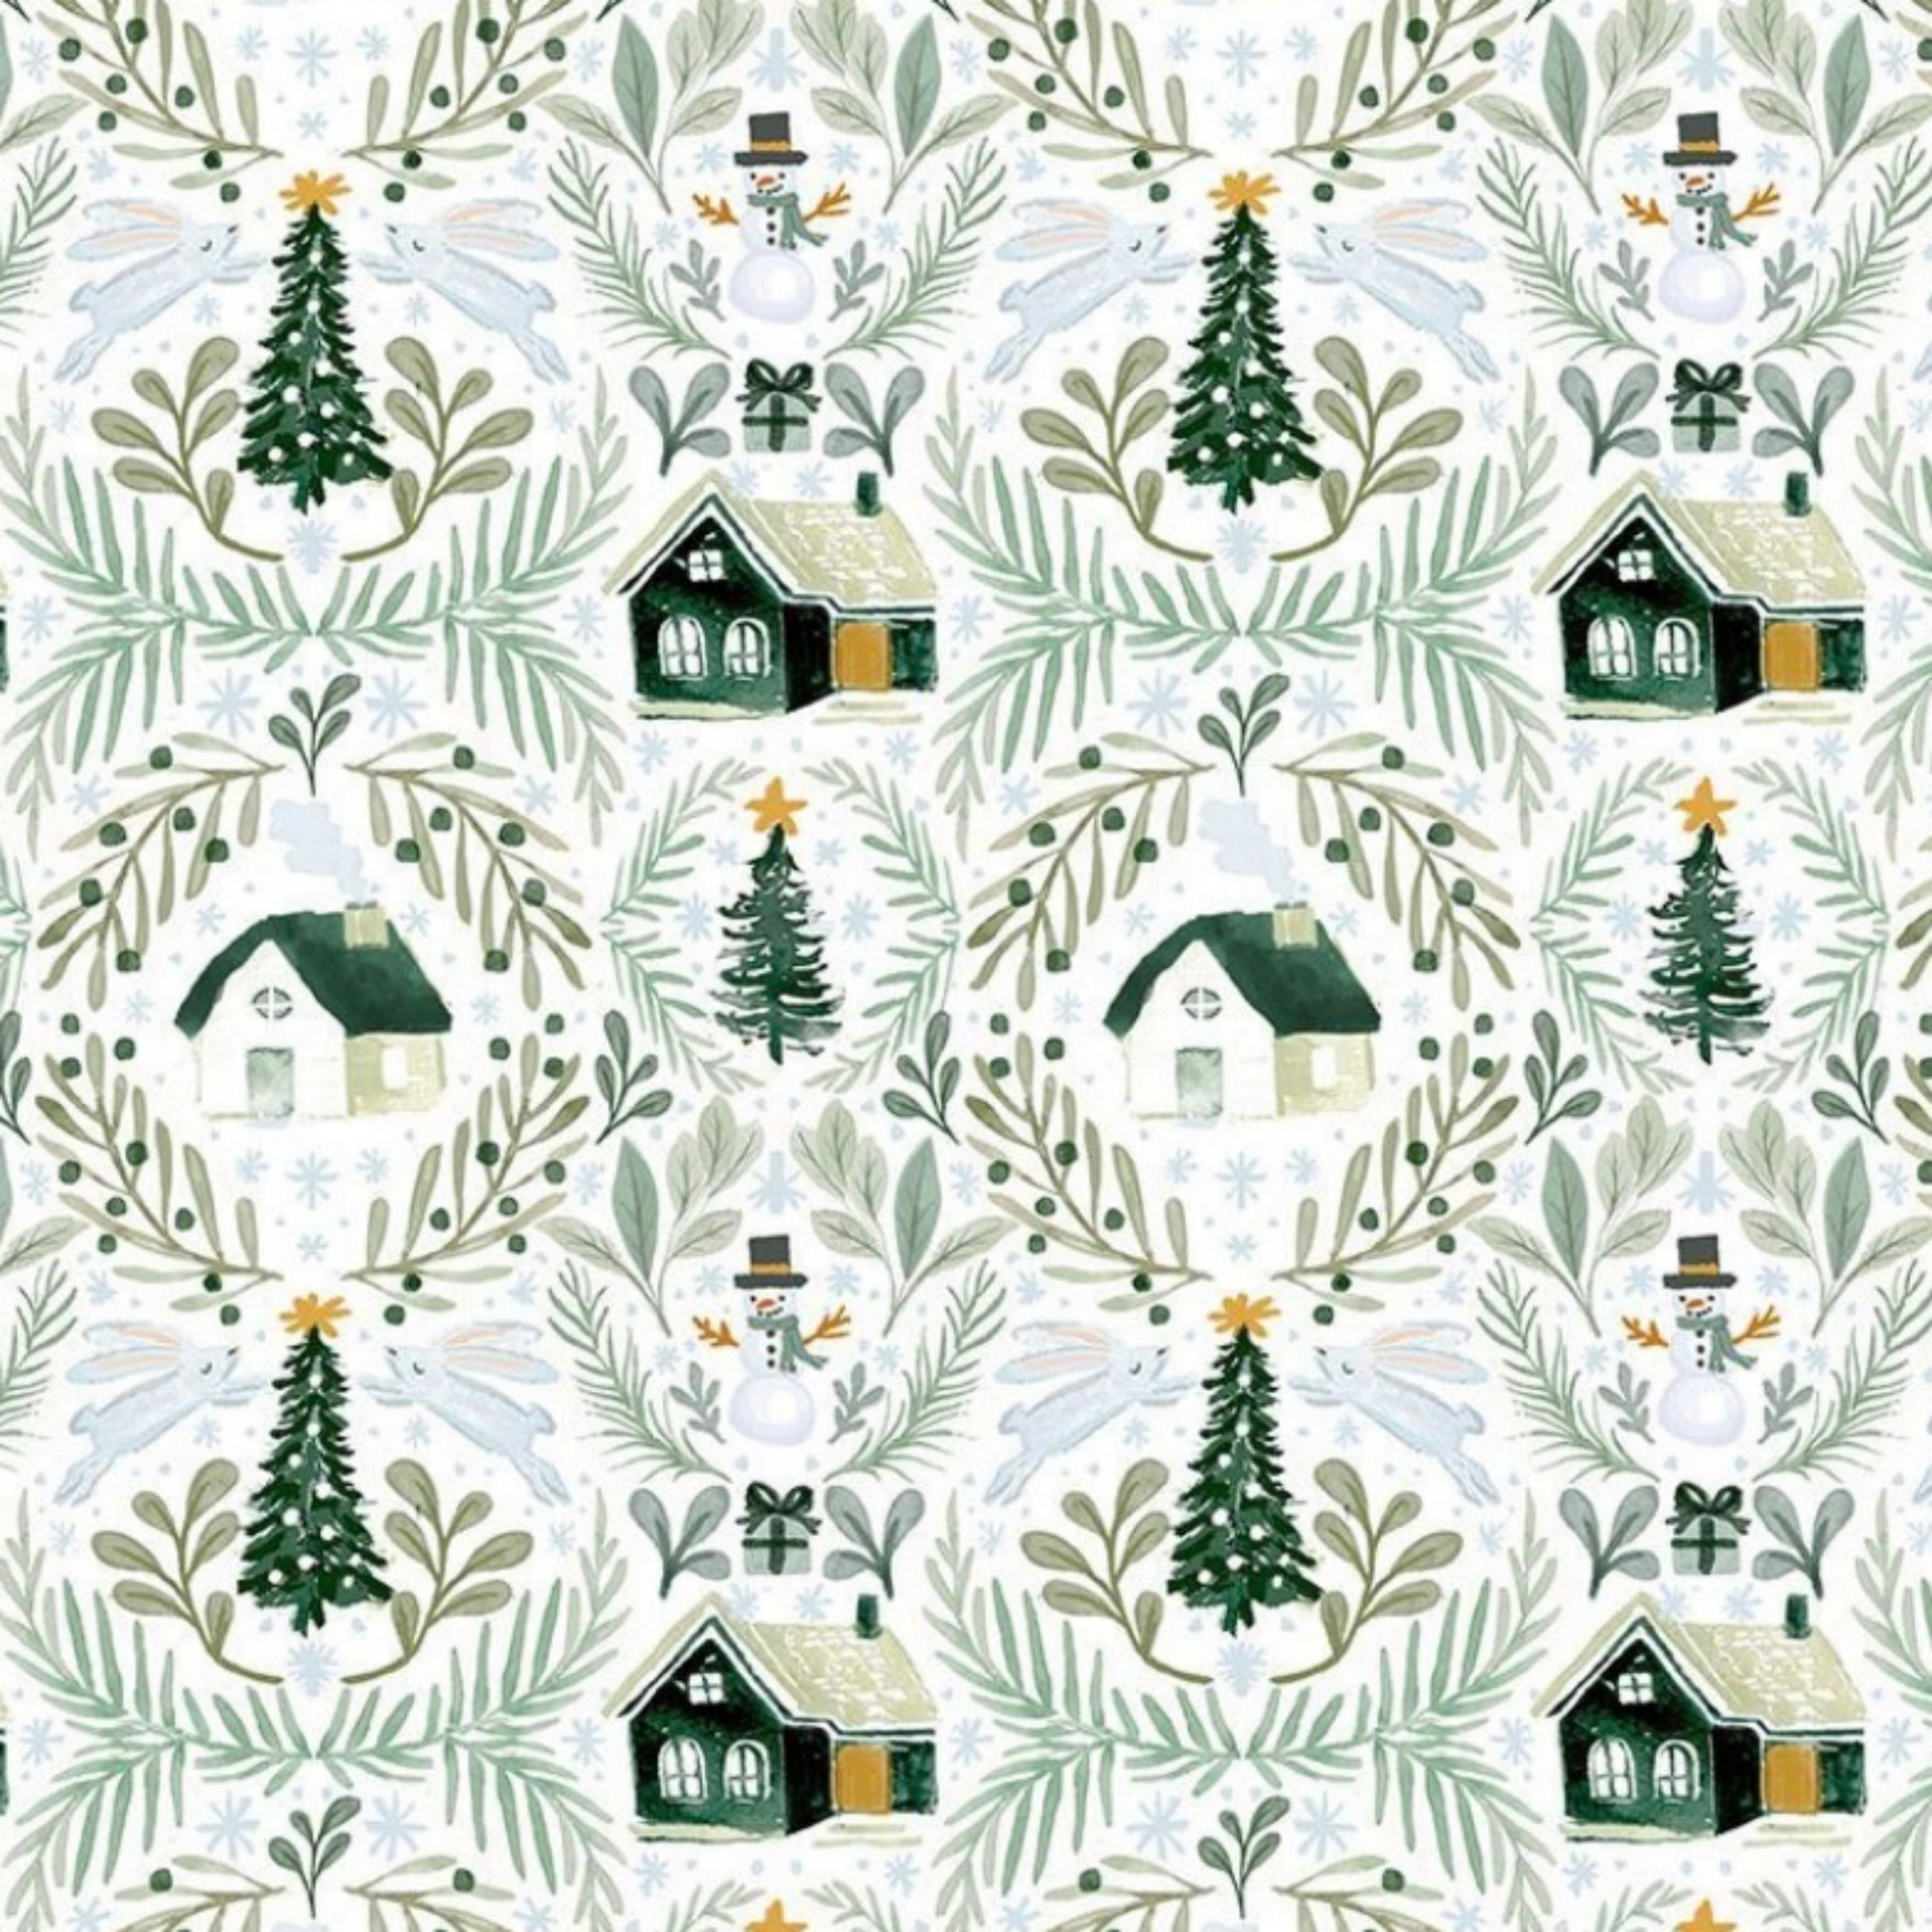 Best In Snow Fabric from the Best In Snow Collection by Clara Jean for Dear Stella Fabrics